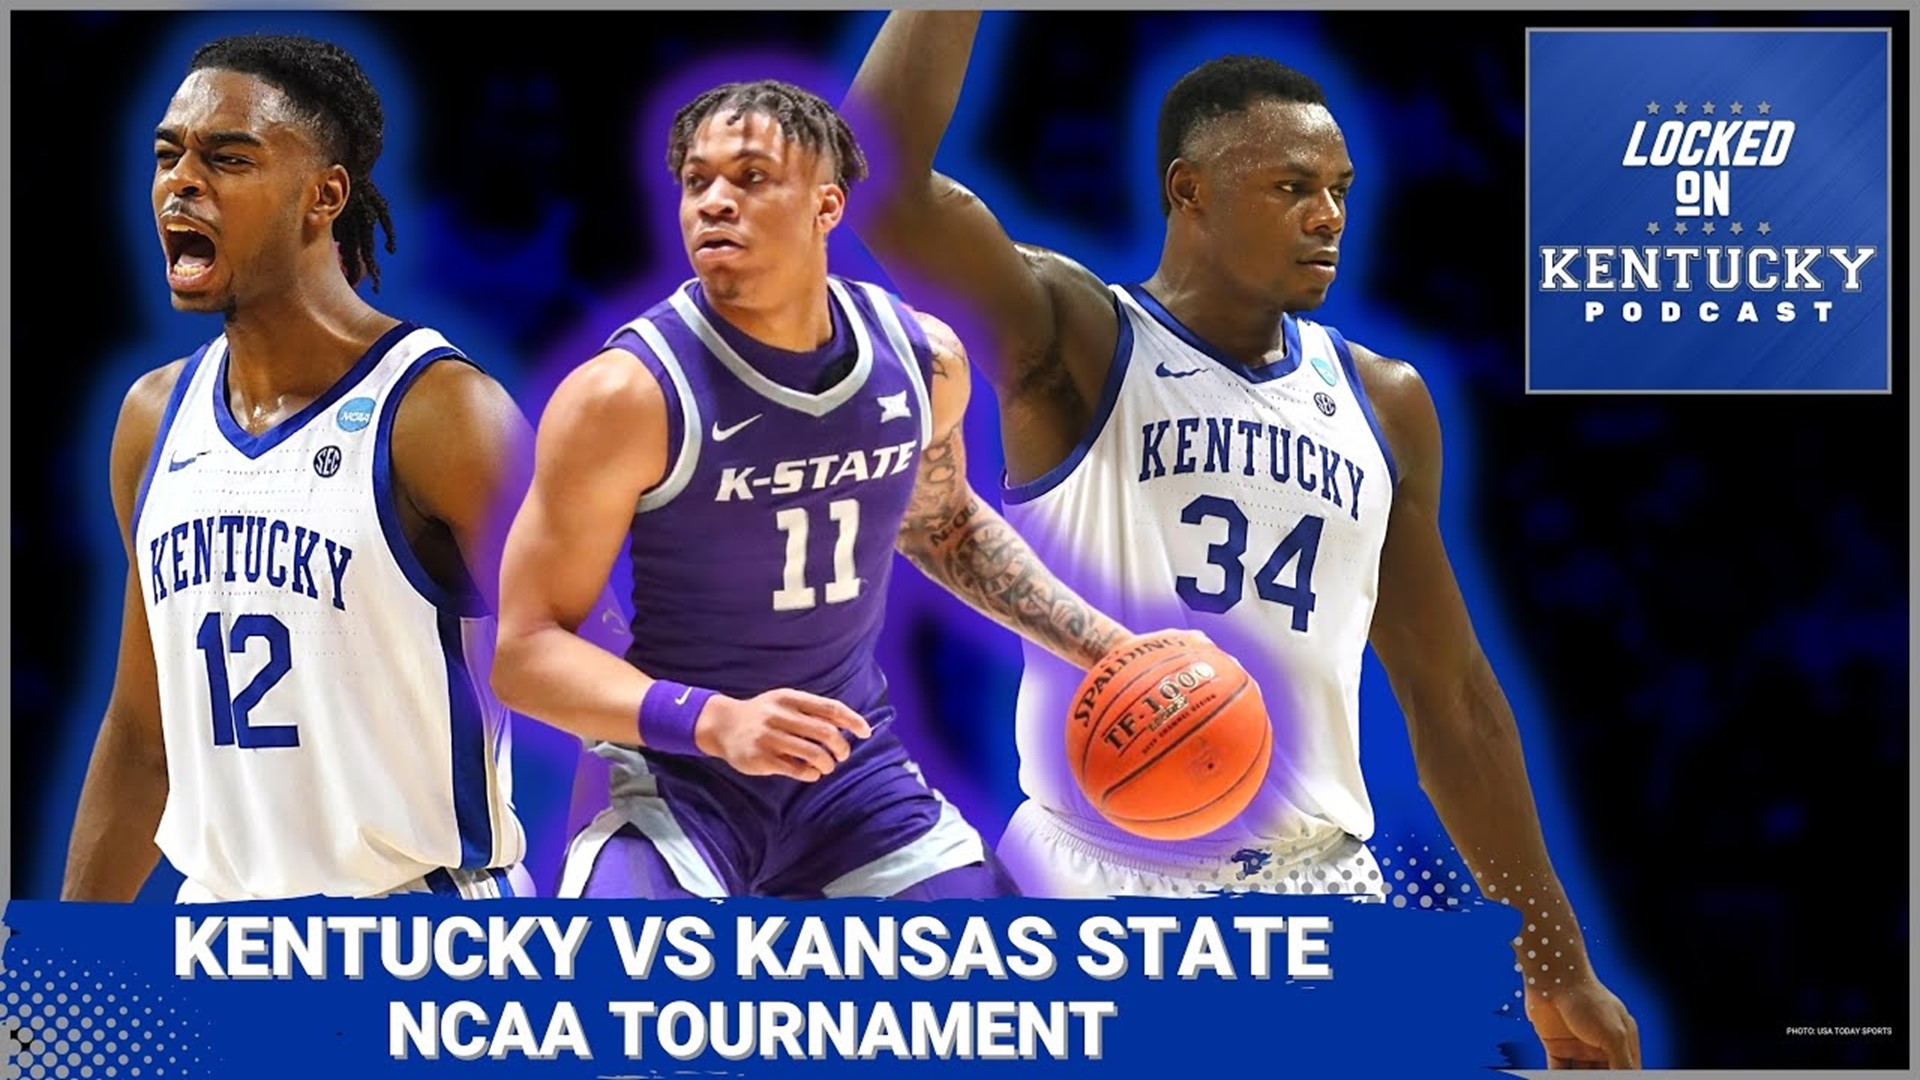 Do the Kentucky Wildcats have a matchup advantage over Kansas State?